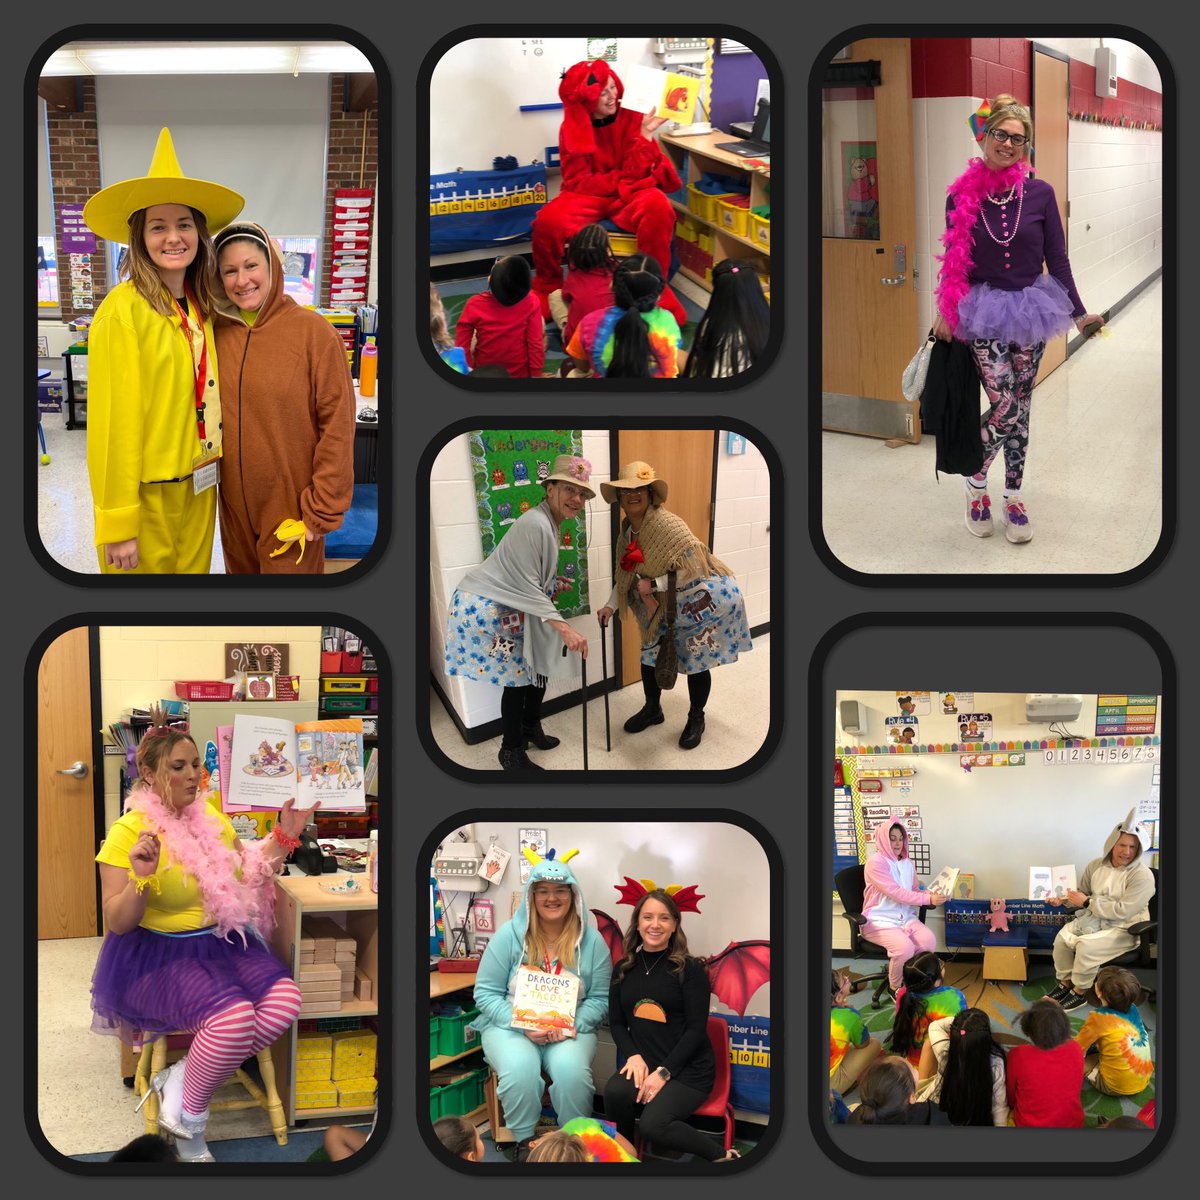 Our kindergarten loved character book day!…A Fun day was had by all!!